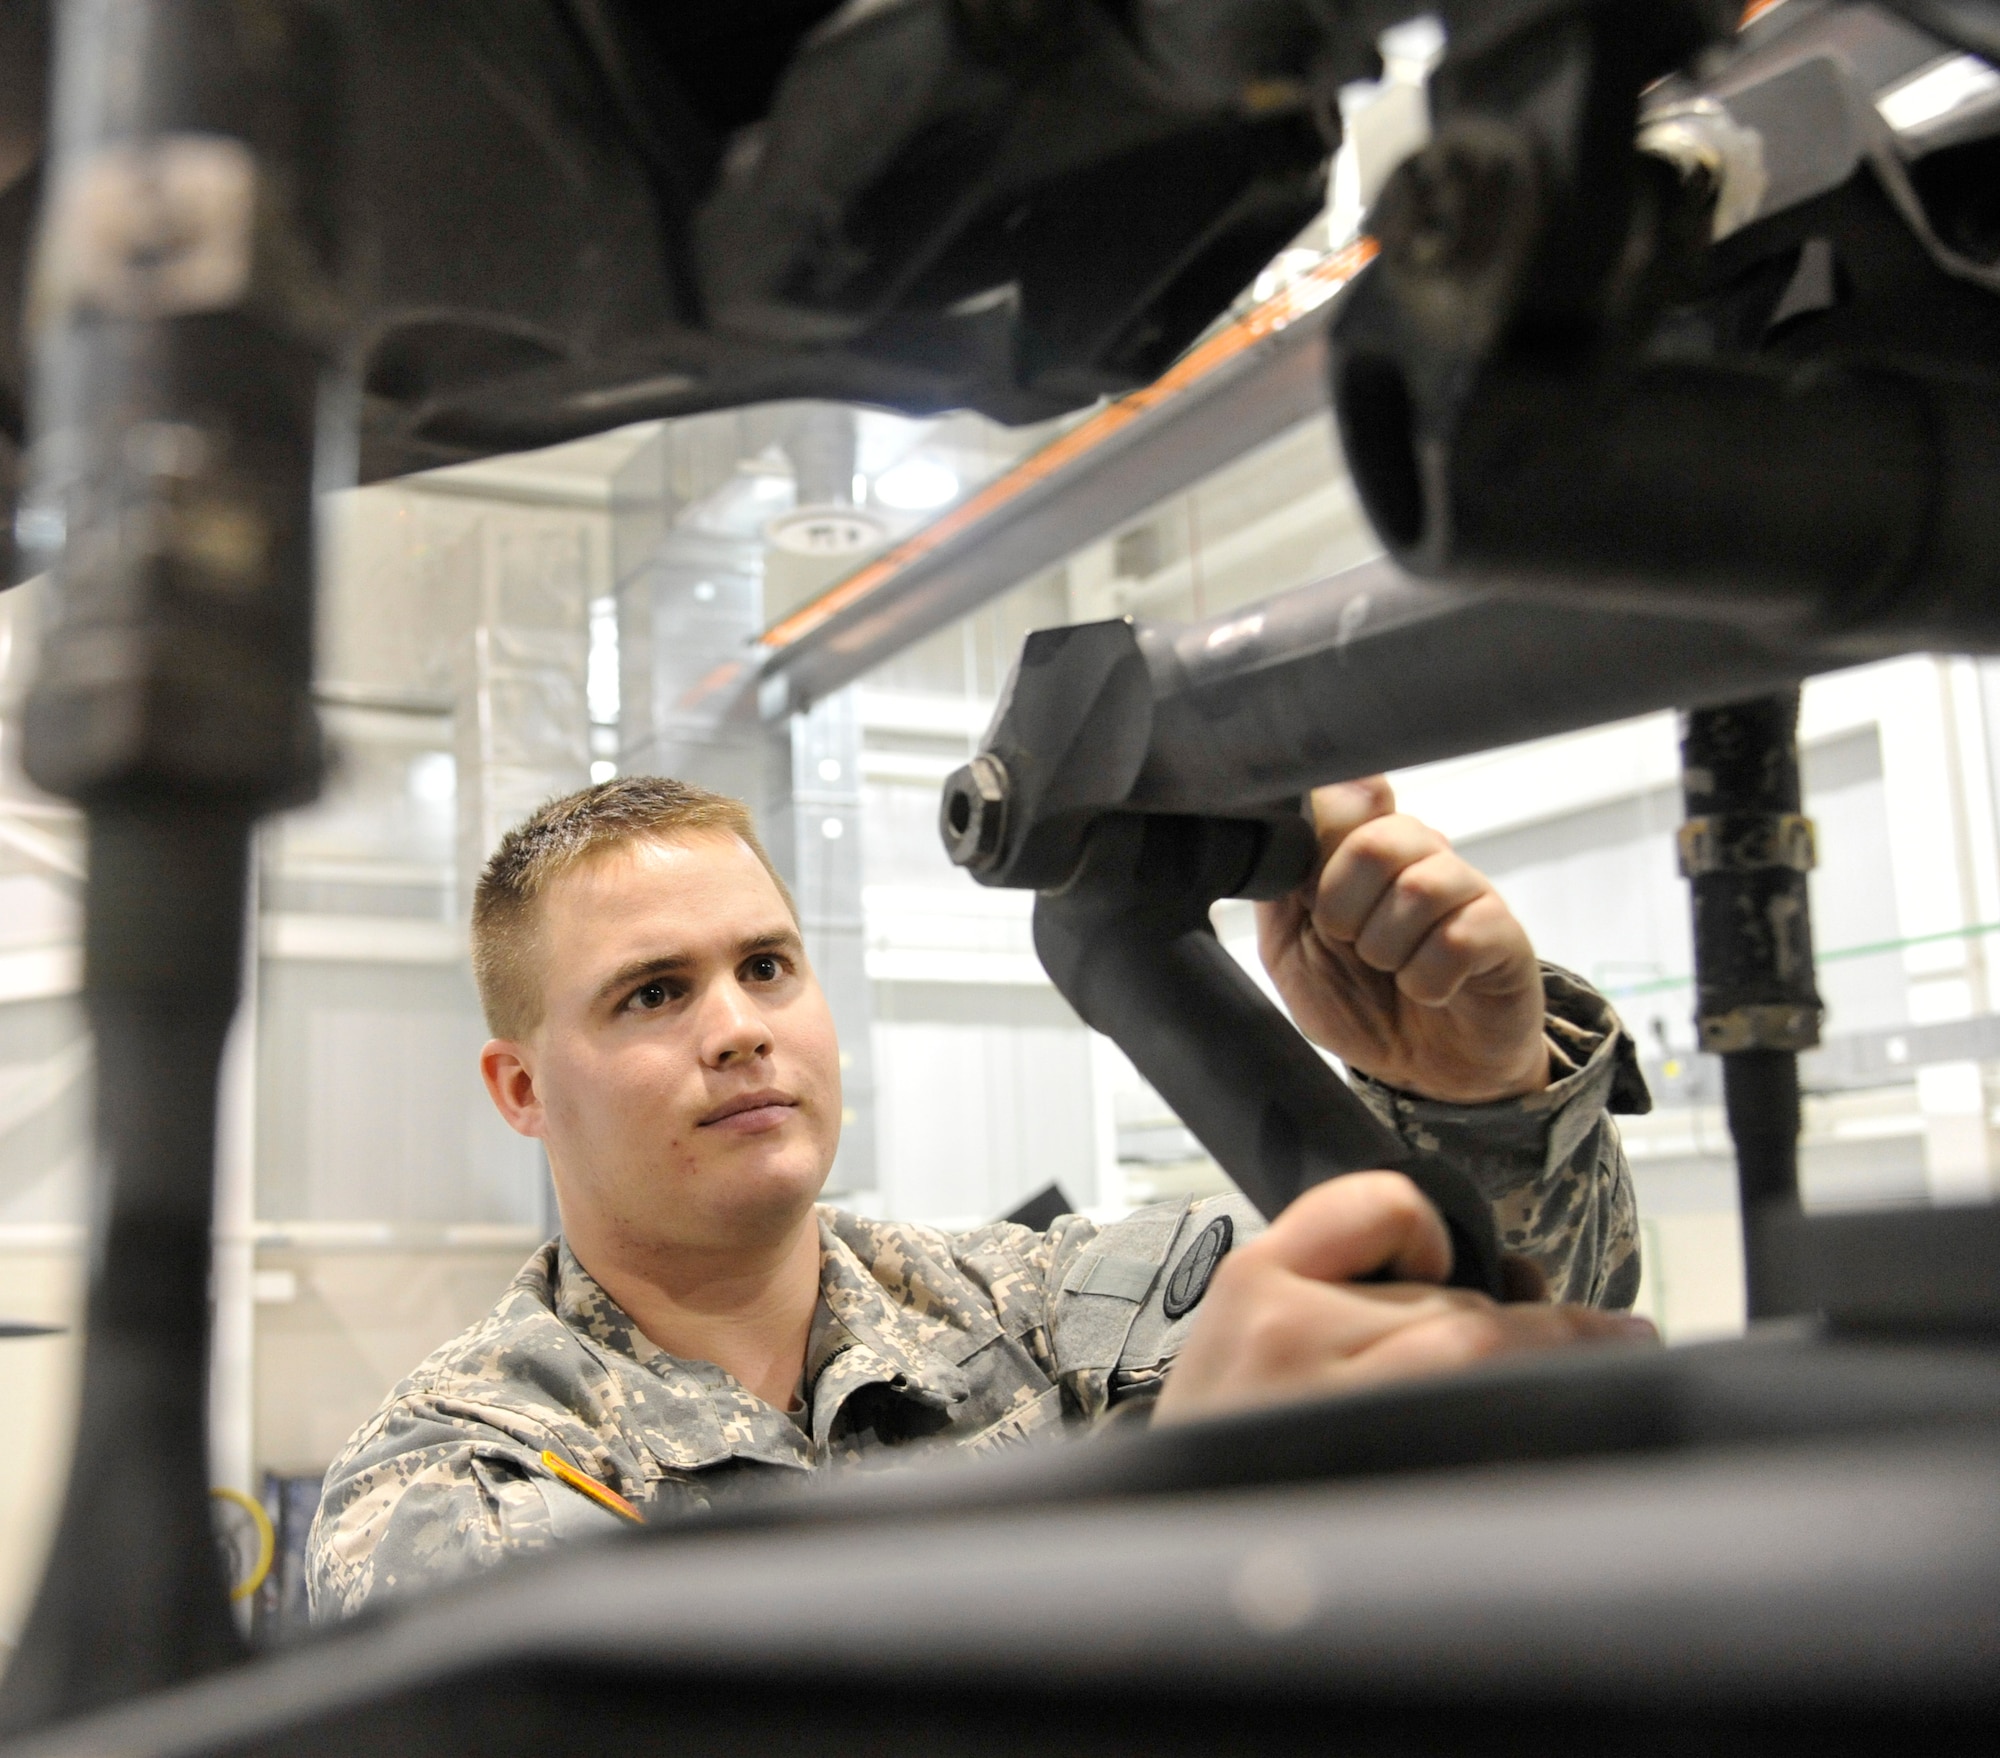 U.S. Army Spc. Todd Gann, 1-135th Attack/Reconnaissance Battalion aircraft maintainer, checks for axial play within the bushing of an AH-64 Apache at Whiteman Air Force Base, Mo., Jan. 9, 2014. This inspection ensures that aircraft maintains its structural integrity while in flight. (U.S. Air Force photo by Airman 1st Class Keenan Berry/Released)